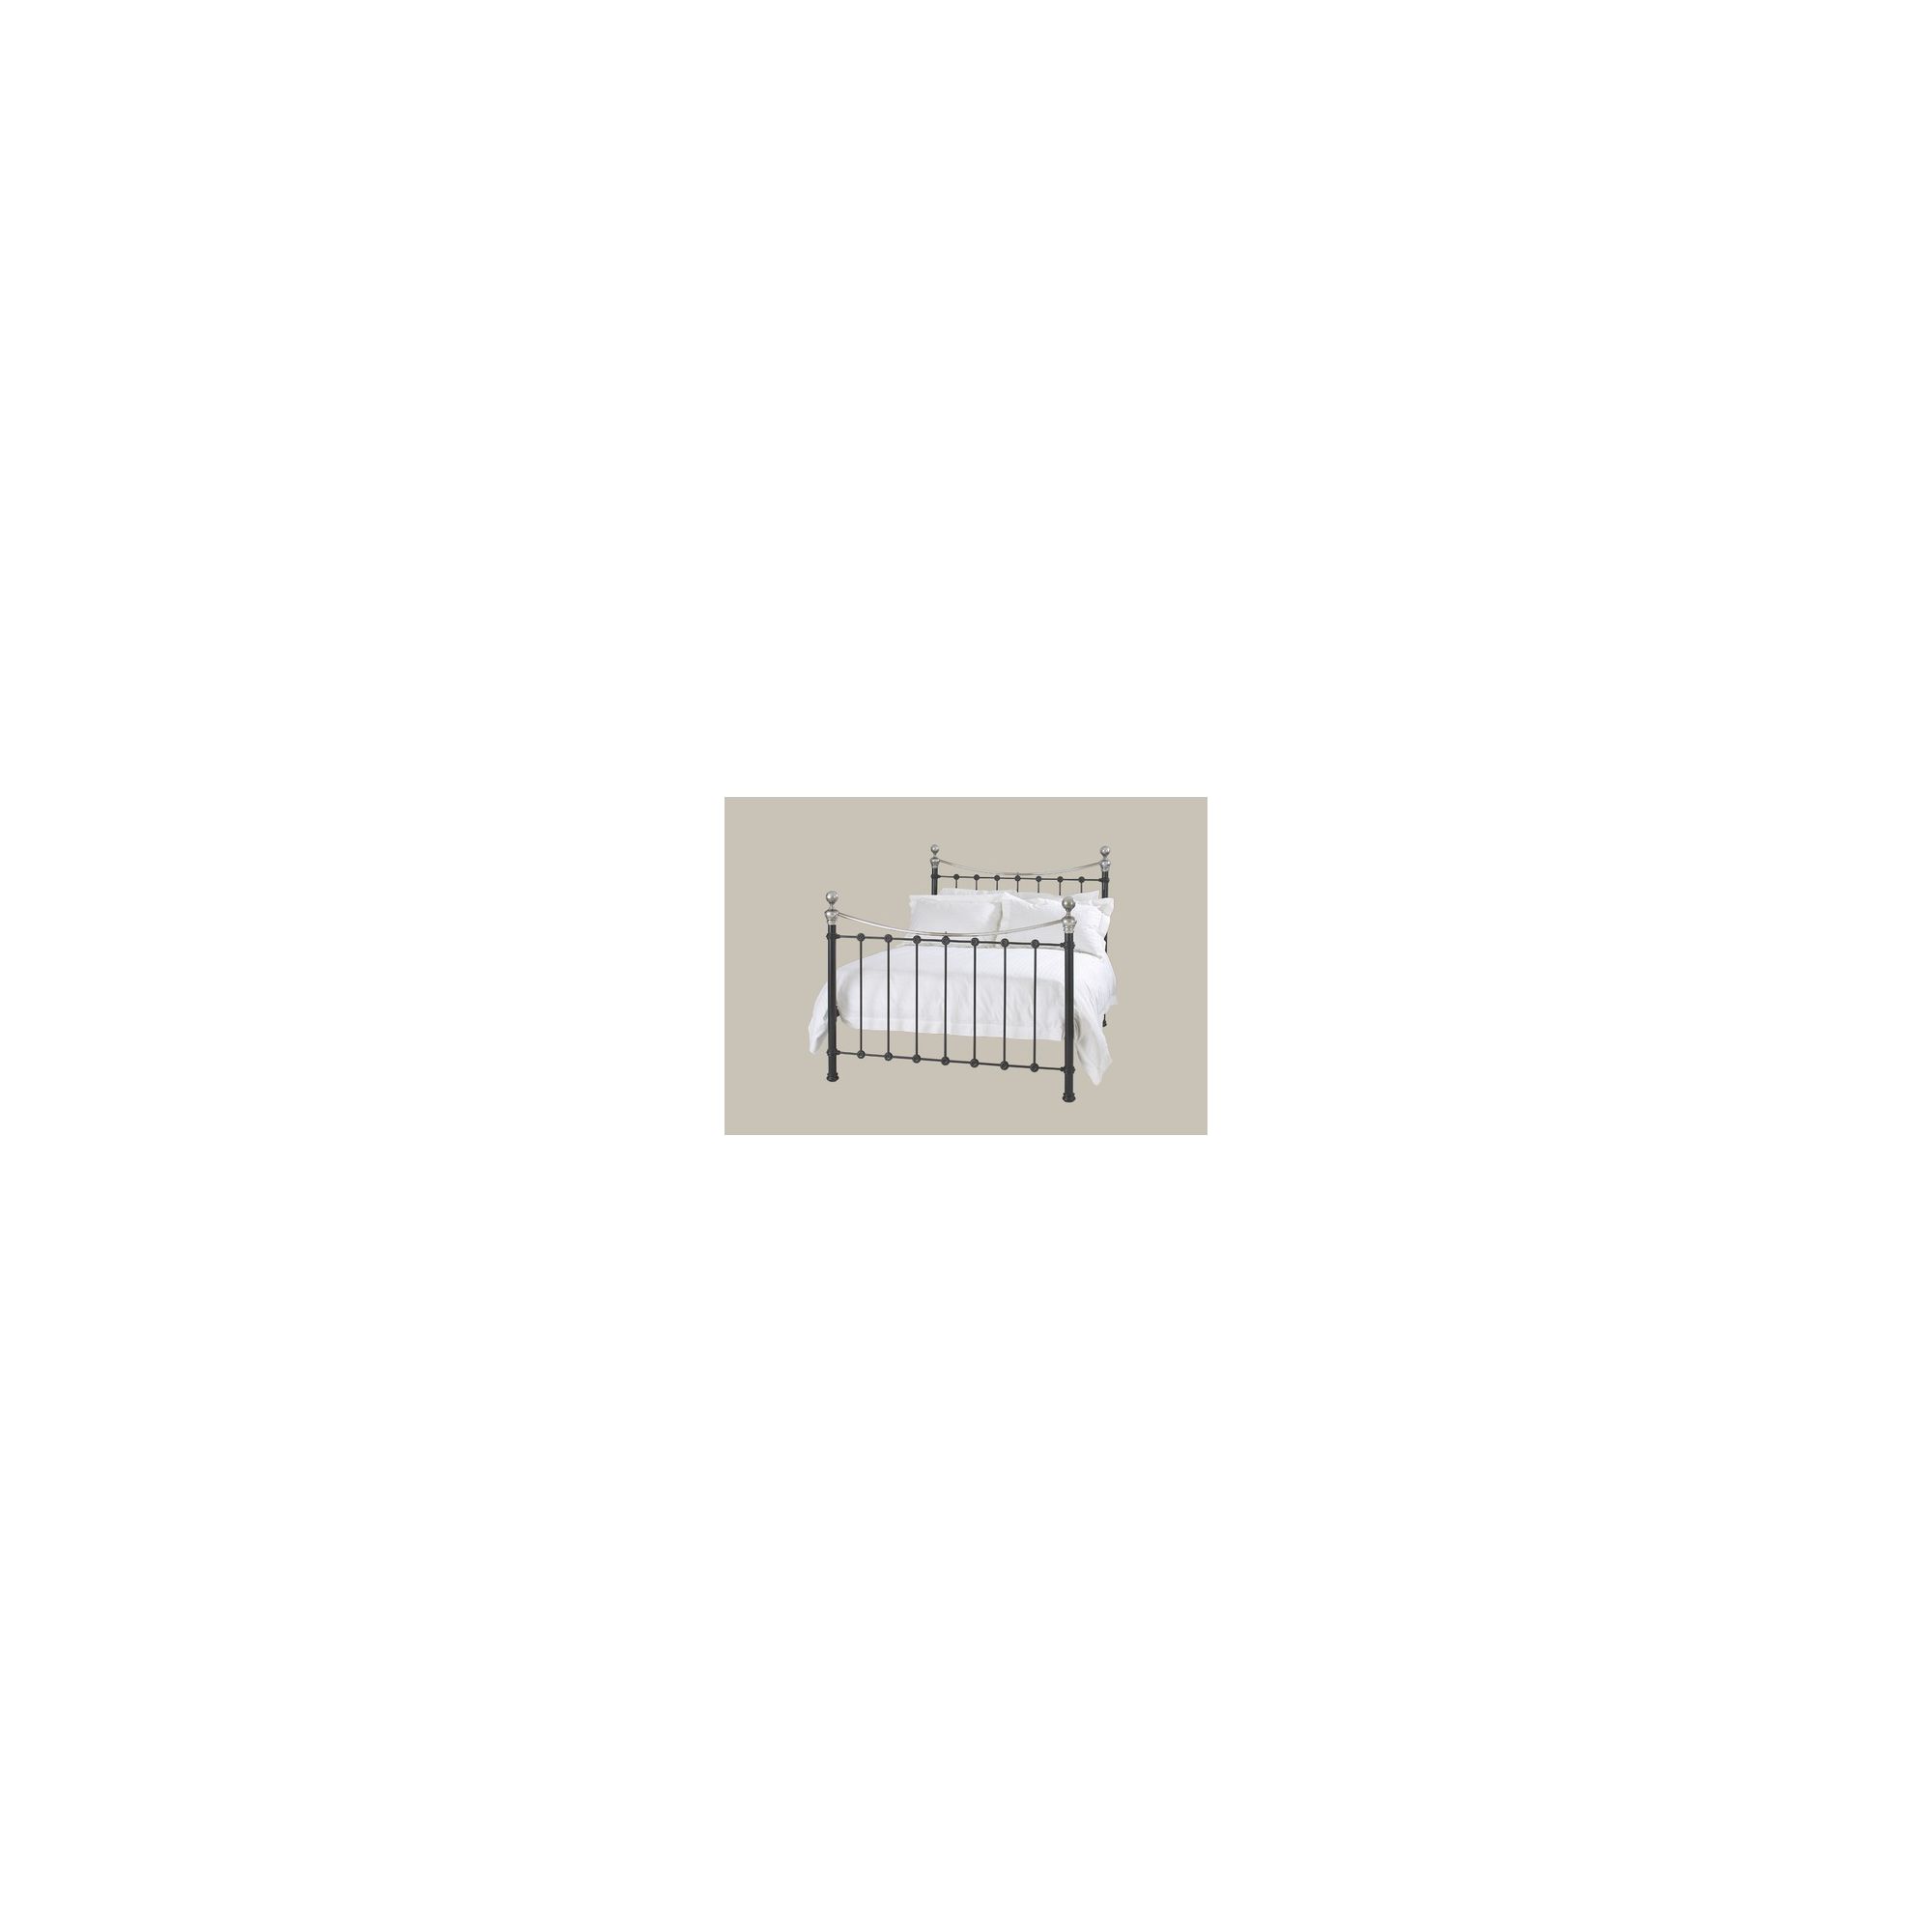 OBC Chromo Selkirk Bed Frame - King at Tesco Direct